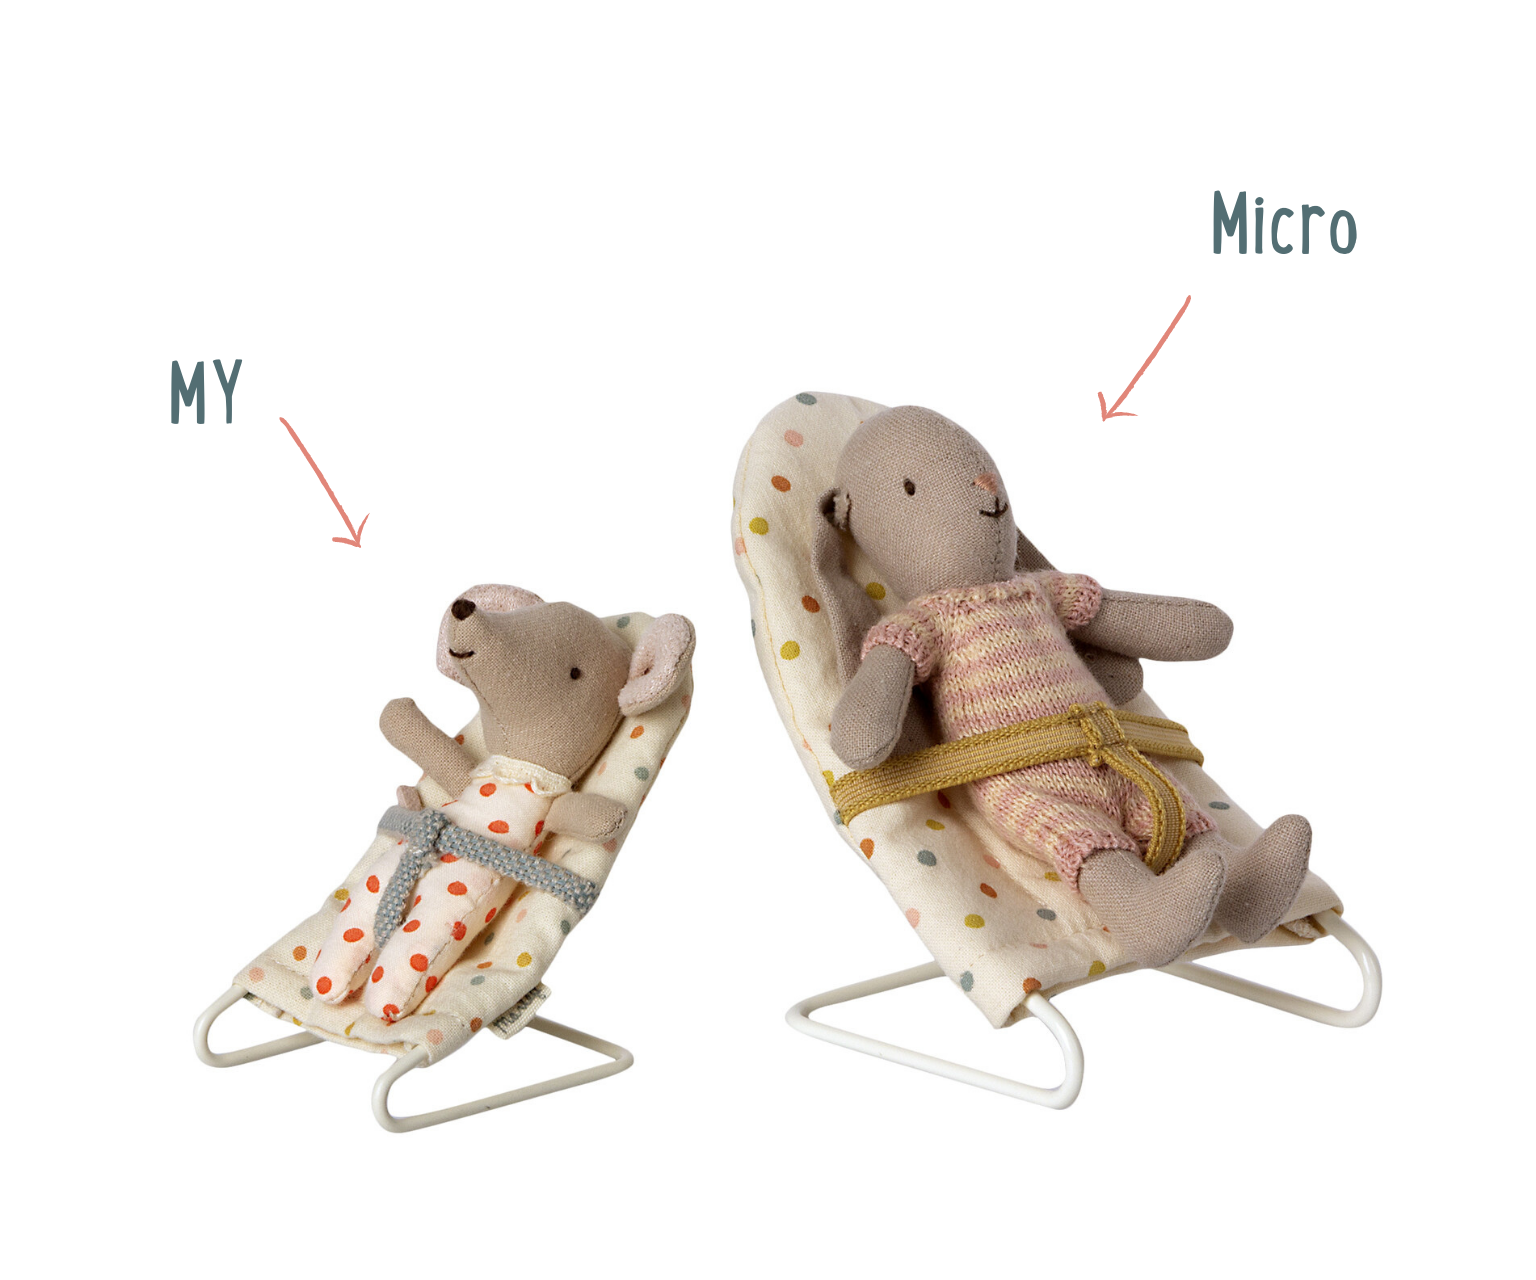 Maileg Micro Mouse "Babysitter" Accessory